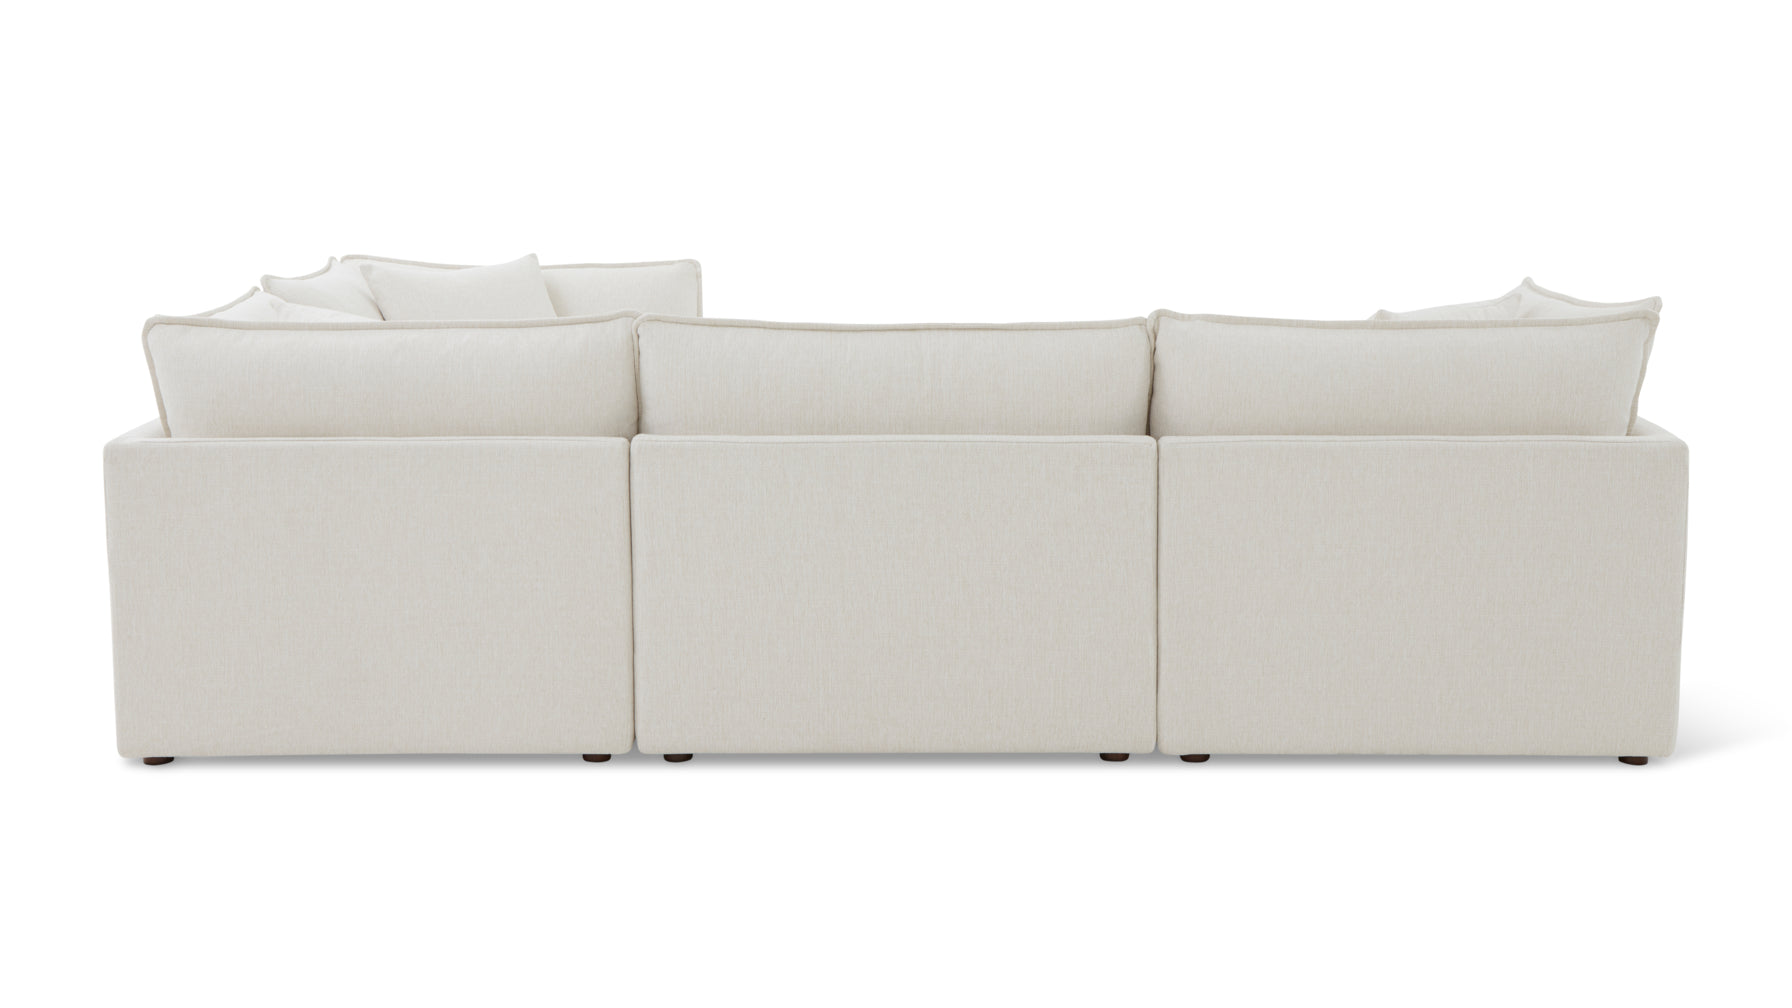 Chill Time 4-Piece Modular Sectional Closed, Birch - Image 6